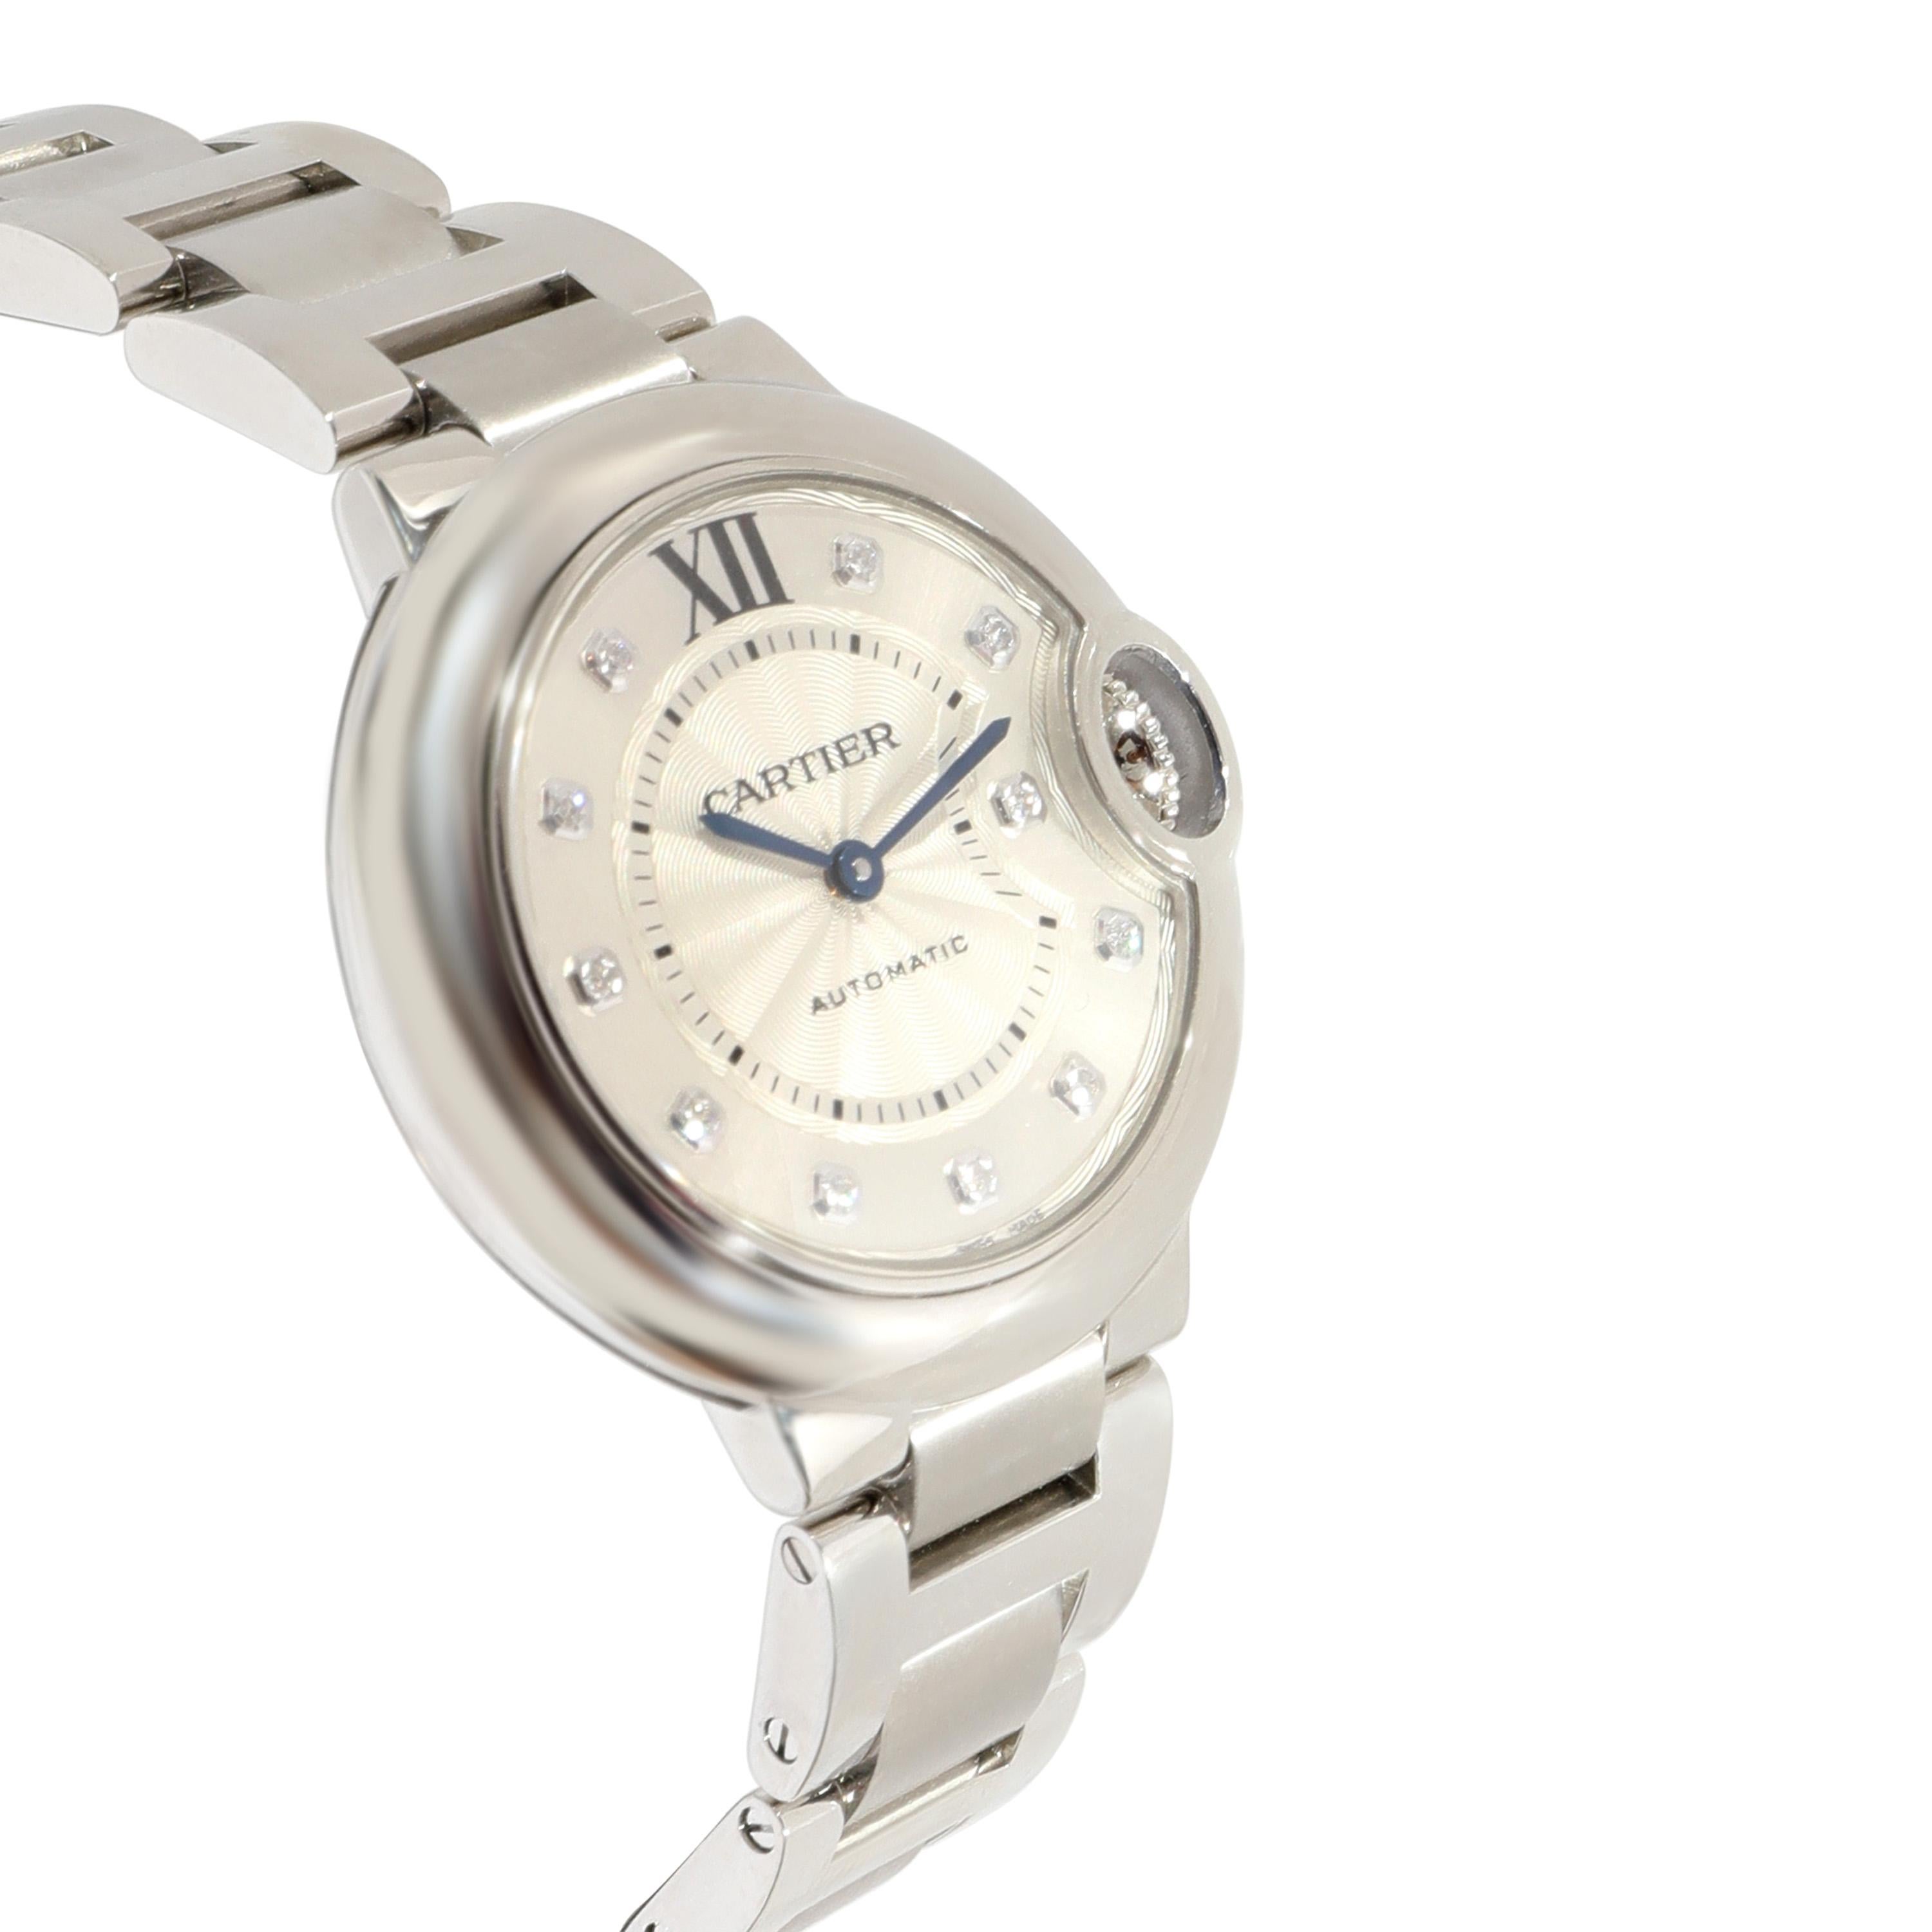 Cartier Ballon Bleu W4BB0021 Women's Watch in  Stainless Steel

SKU: 128403

PRIMARY DETAILS
Brand: Cartier
Model: Ballon Bleu
Country of Origin: Switzerland
Movement Type: Mechanical: Automatic/Kinetic
Year of Manufacture: 2020-2029
Condition: